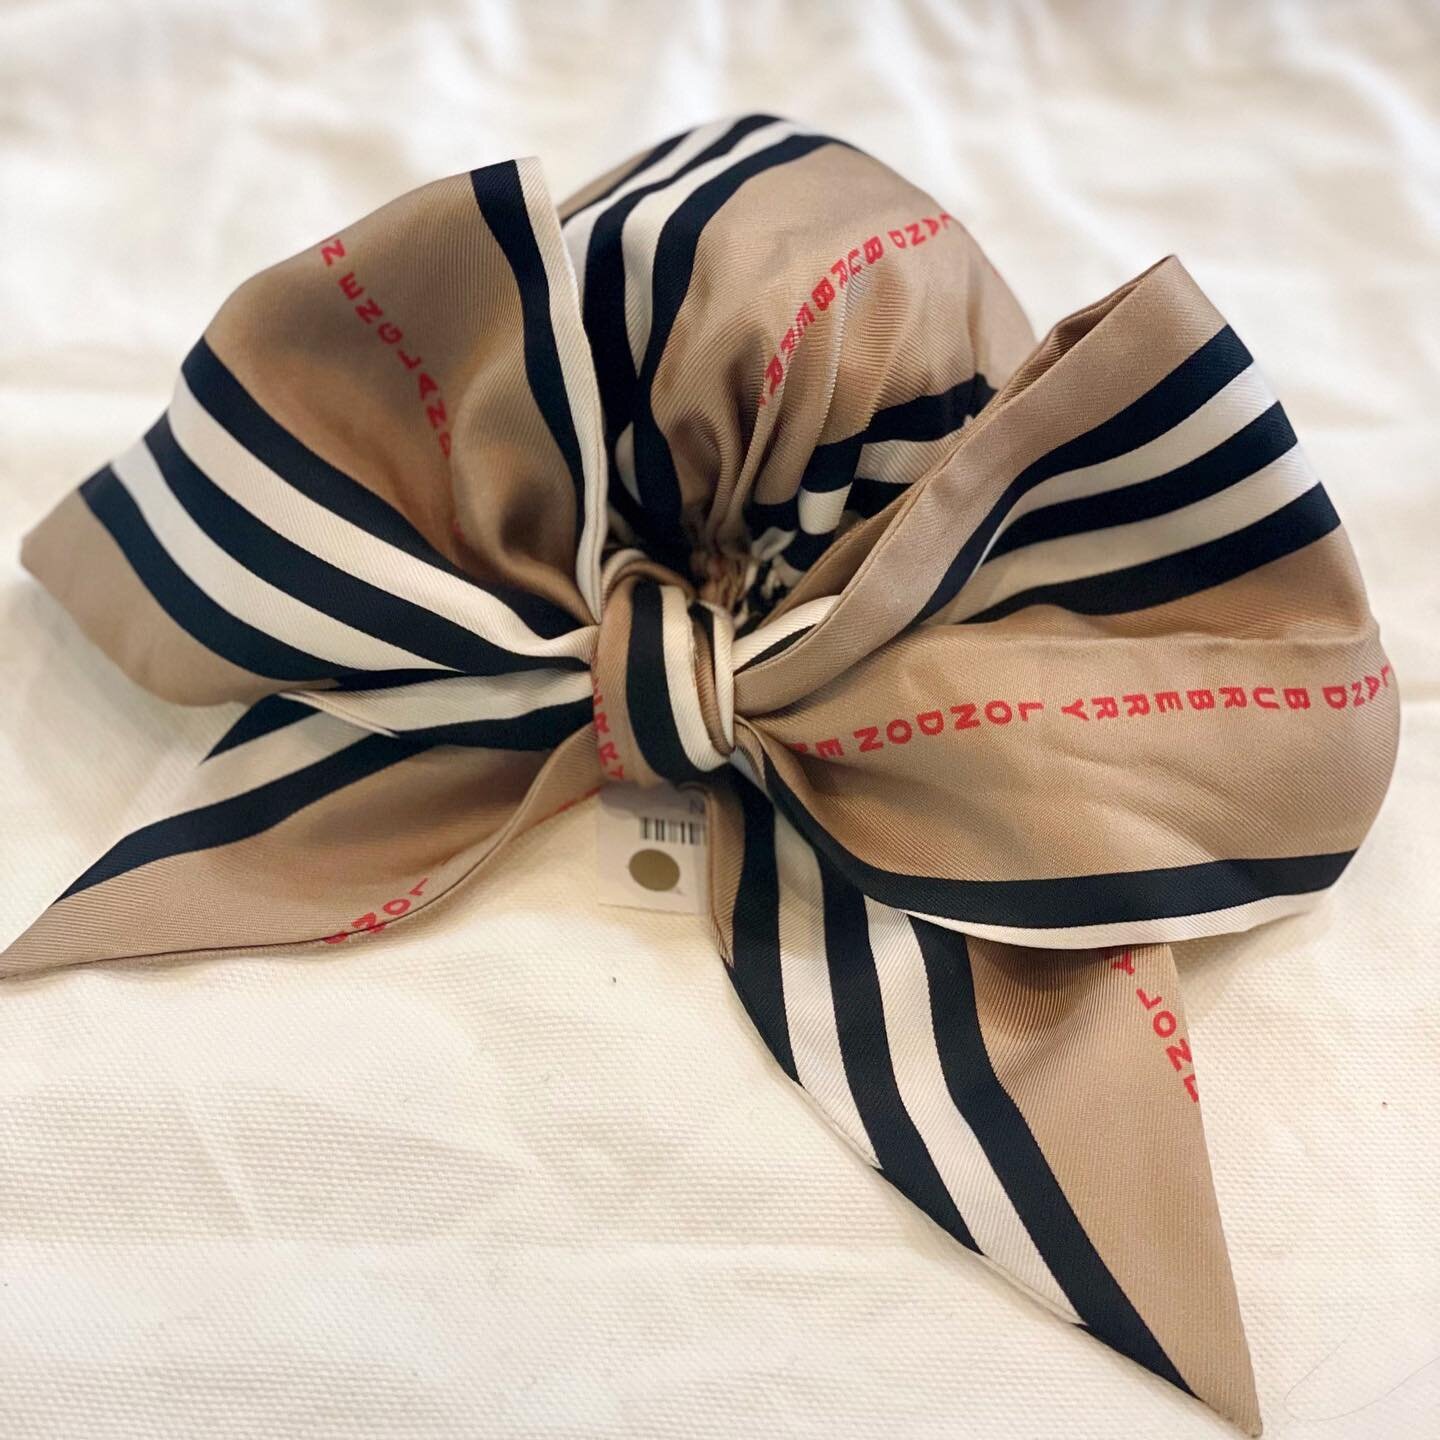 ❤️Burberry❤️ New in at @greenestreetredbank this cute Burberry scrunchy! Available for $100.95
⠀⠀⠀⠀⠀⠀⠀⠀⠀
For inquiries call or email us!
📞732-268-7913
📧redbank@greenestreet.com